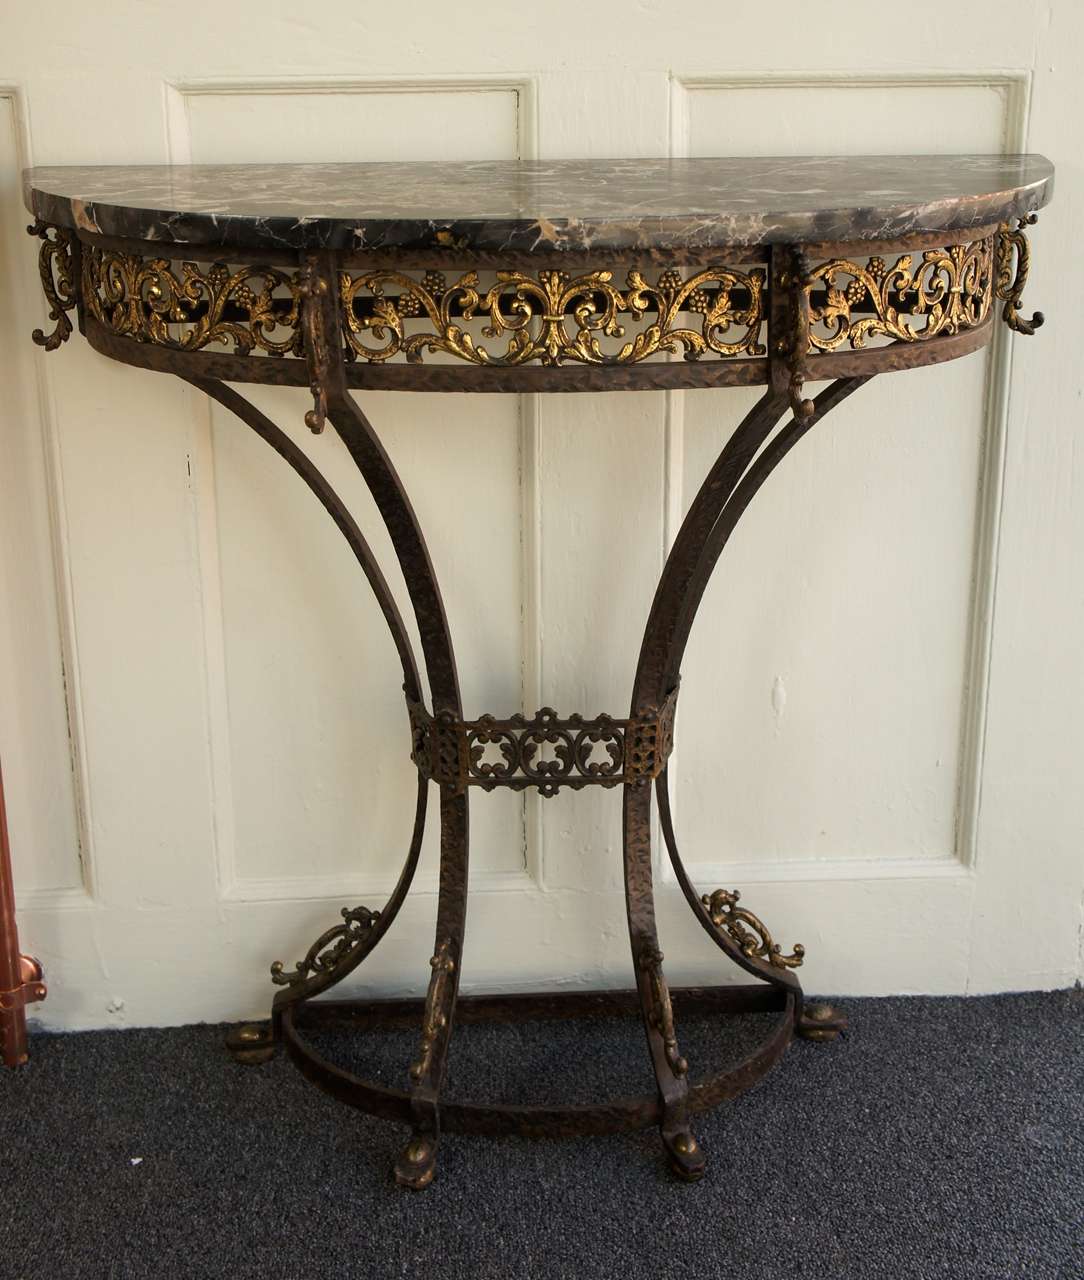 Petite console table, with hand-forged iron structure and brass filigree work. Original Egyptian marble top with strong veining.